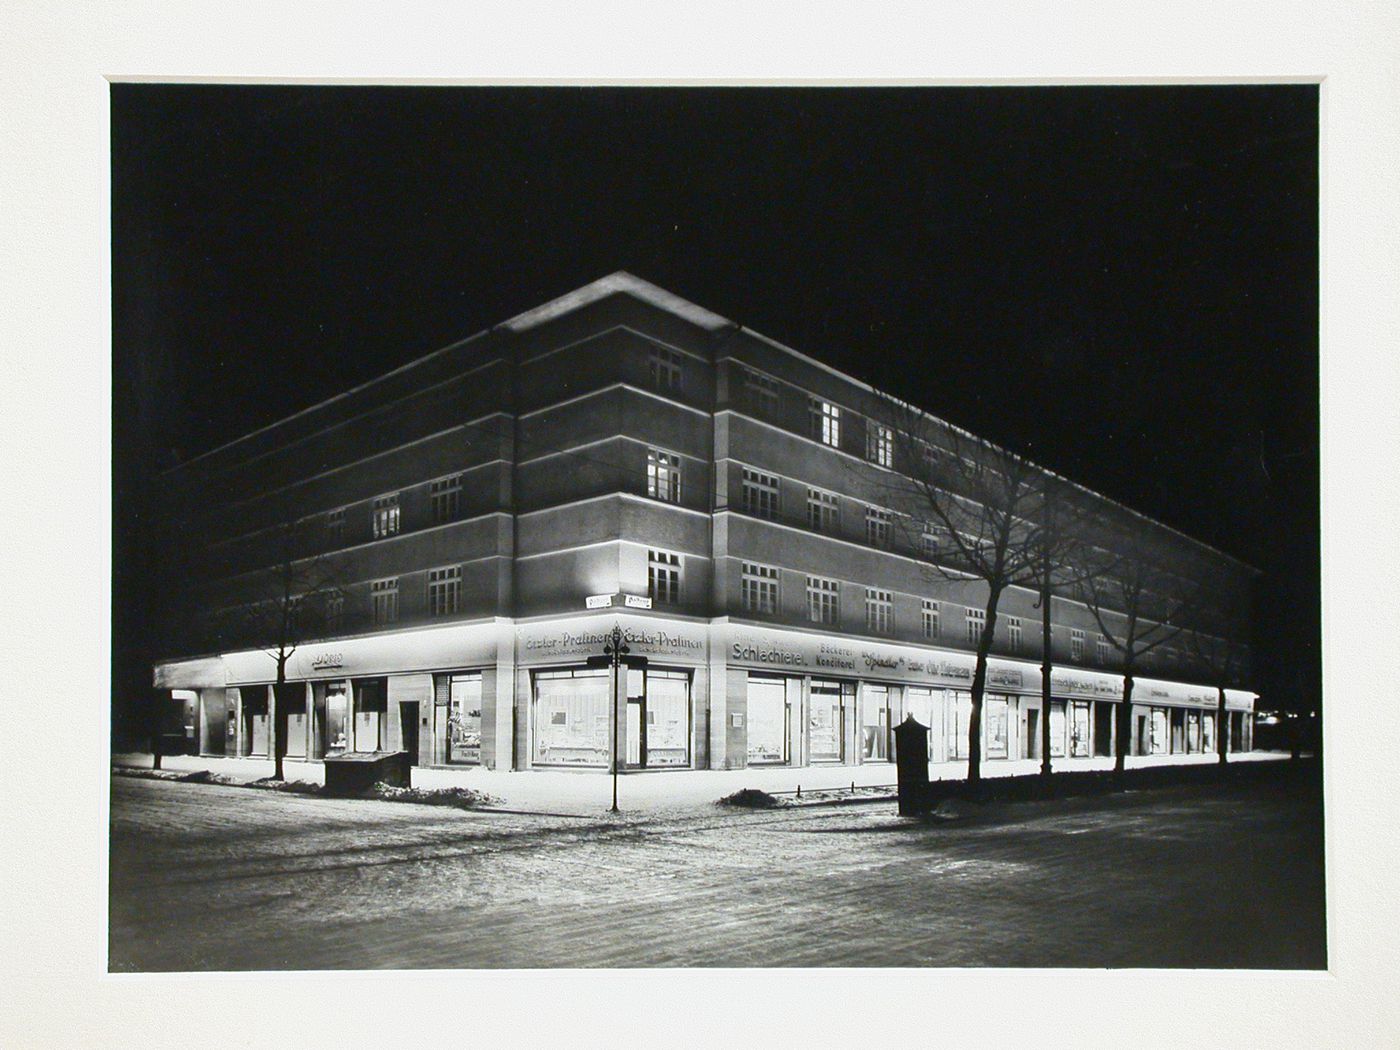 Illuminated night view of four-story modern building on a street corner, Germany